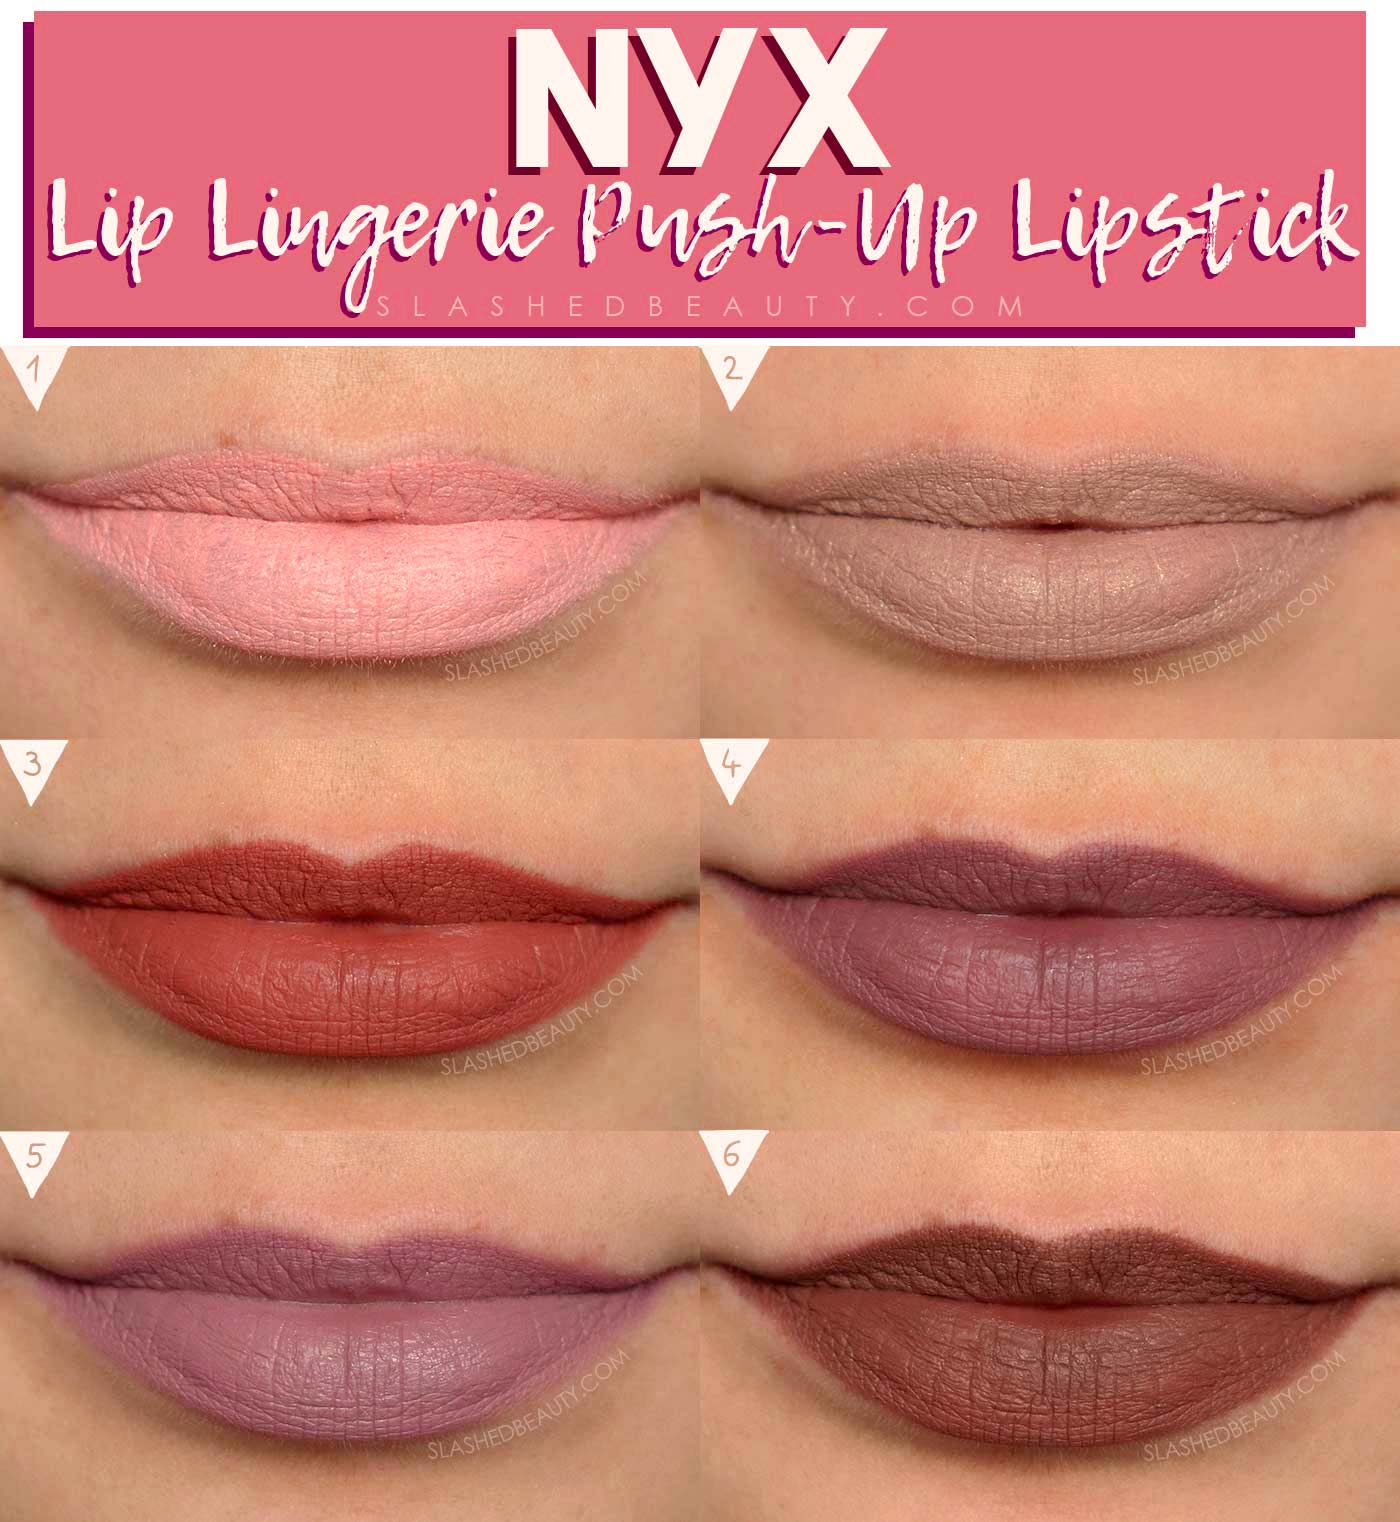 NYX Lingerie Push-Up Long-Lasting Lipsticks Review & Swatches | Drugstore Lip Crayon for Fall | Lip Swatches | Slashed Beauty